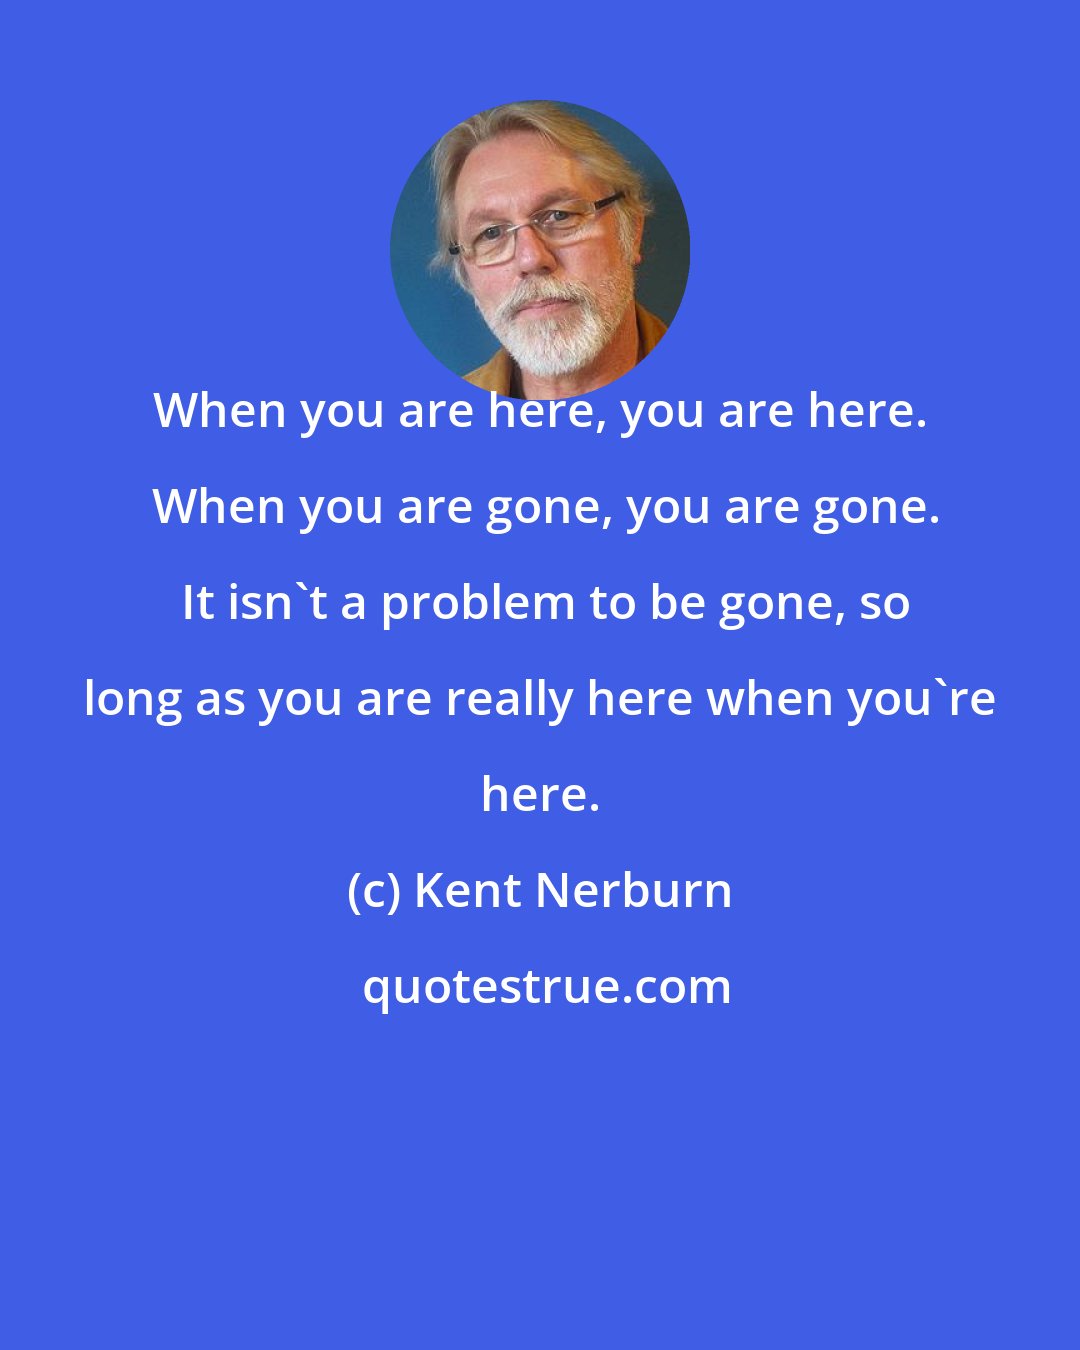 Kent Nerburn: When you are here, you are here.  When you are gone, you are gone.  It isn't a problem to be gone, so long as you are really here when you're here.